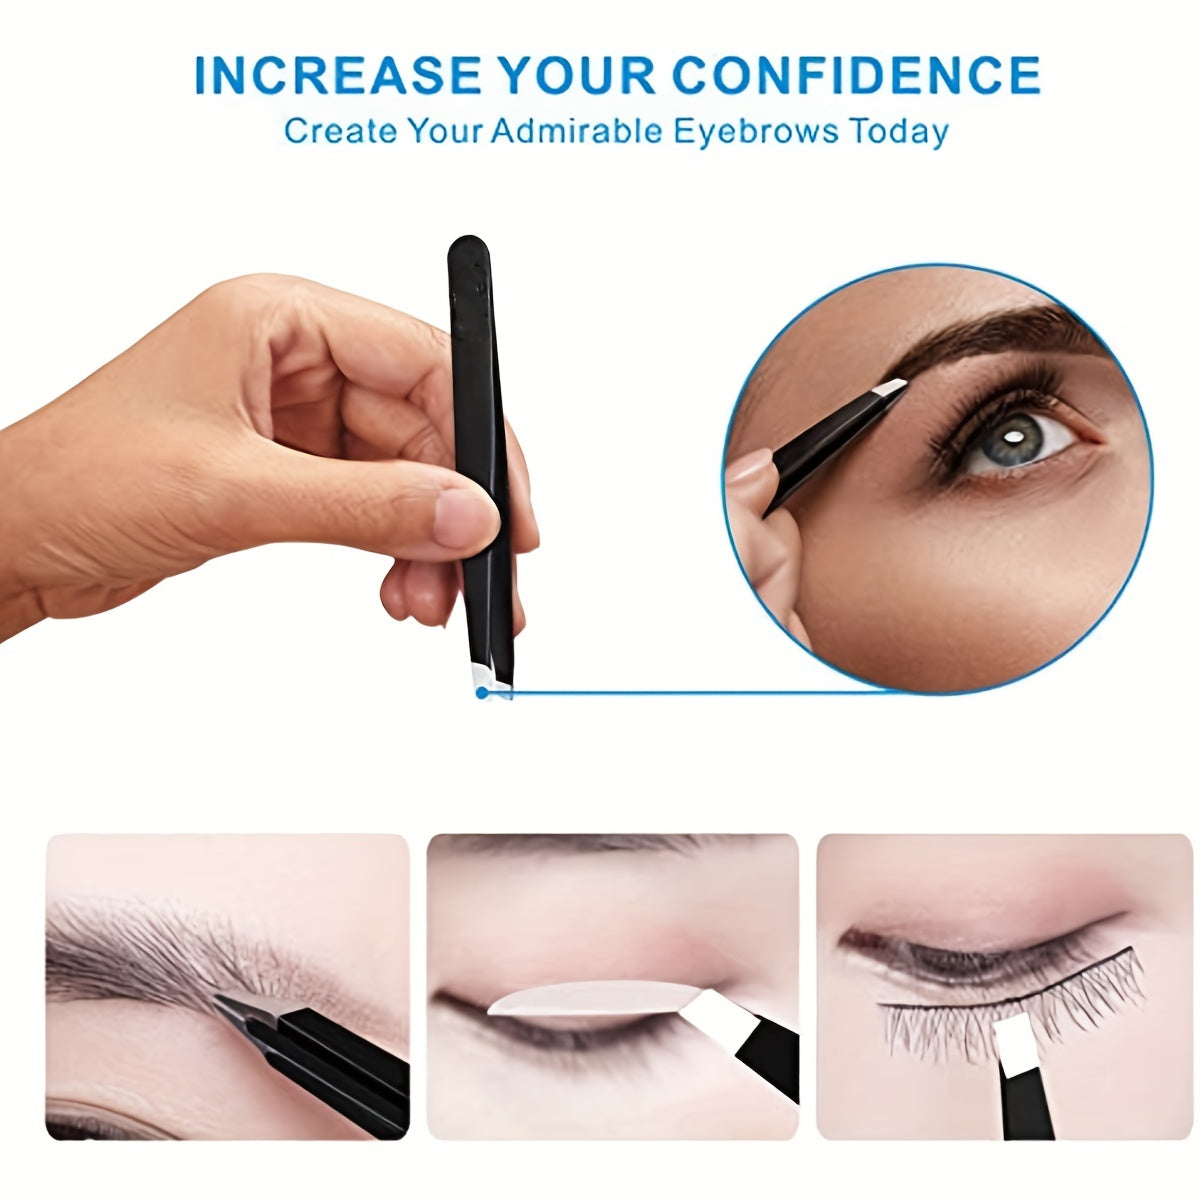 Precision Stainless Steel Tweezers for Eyebrows and Facial Hair - Great for Splinter and Ingrown Hair Removal - Perfect for Men and Women (Black) 1pc